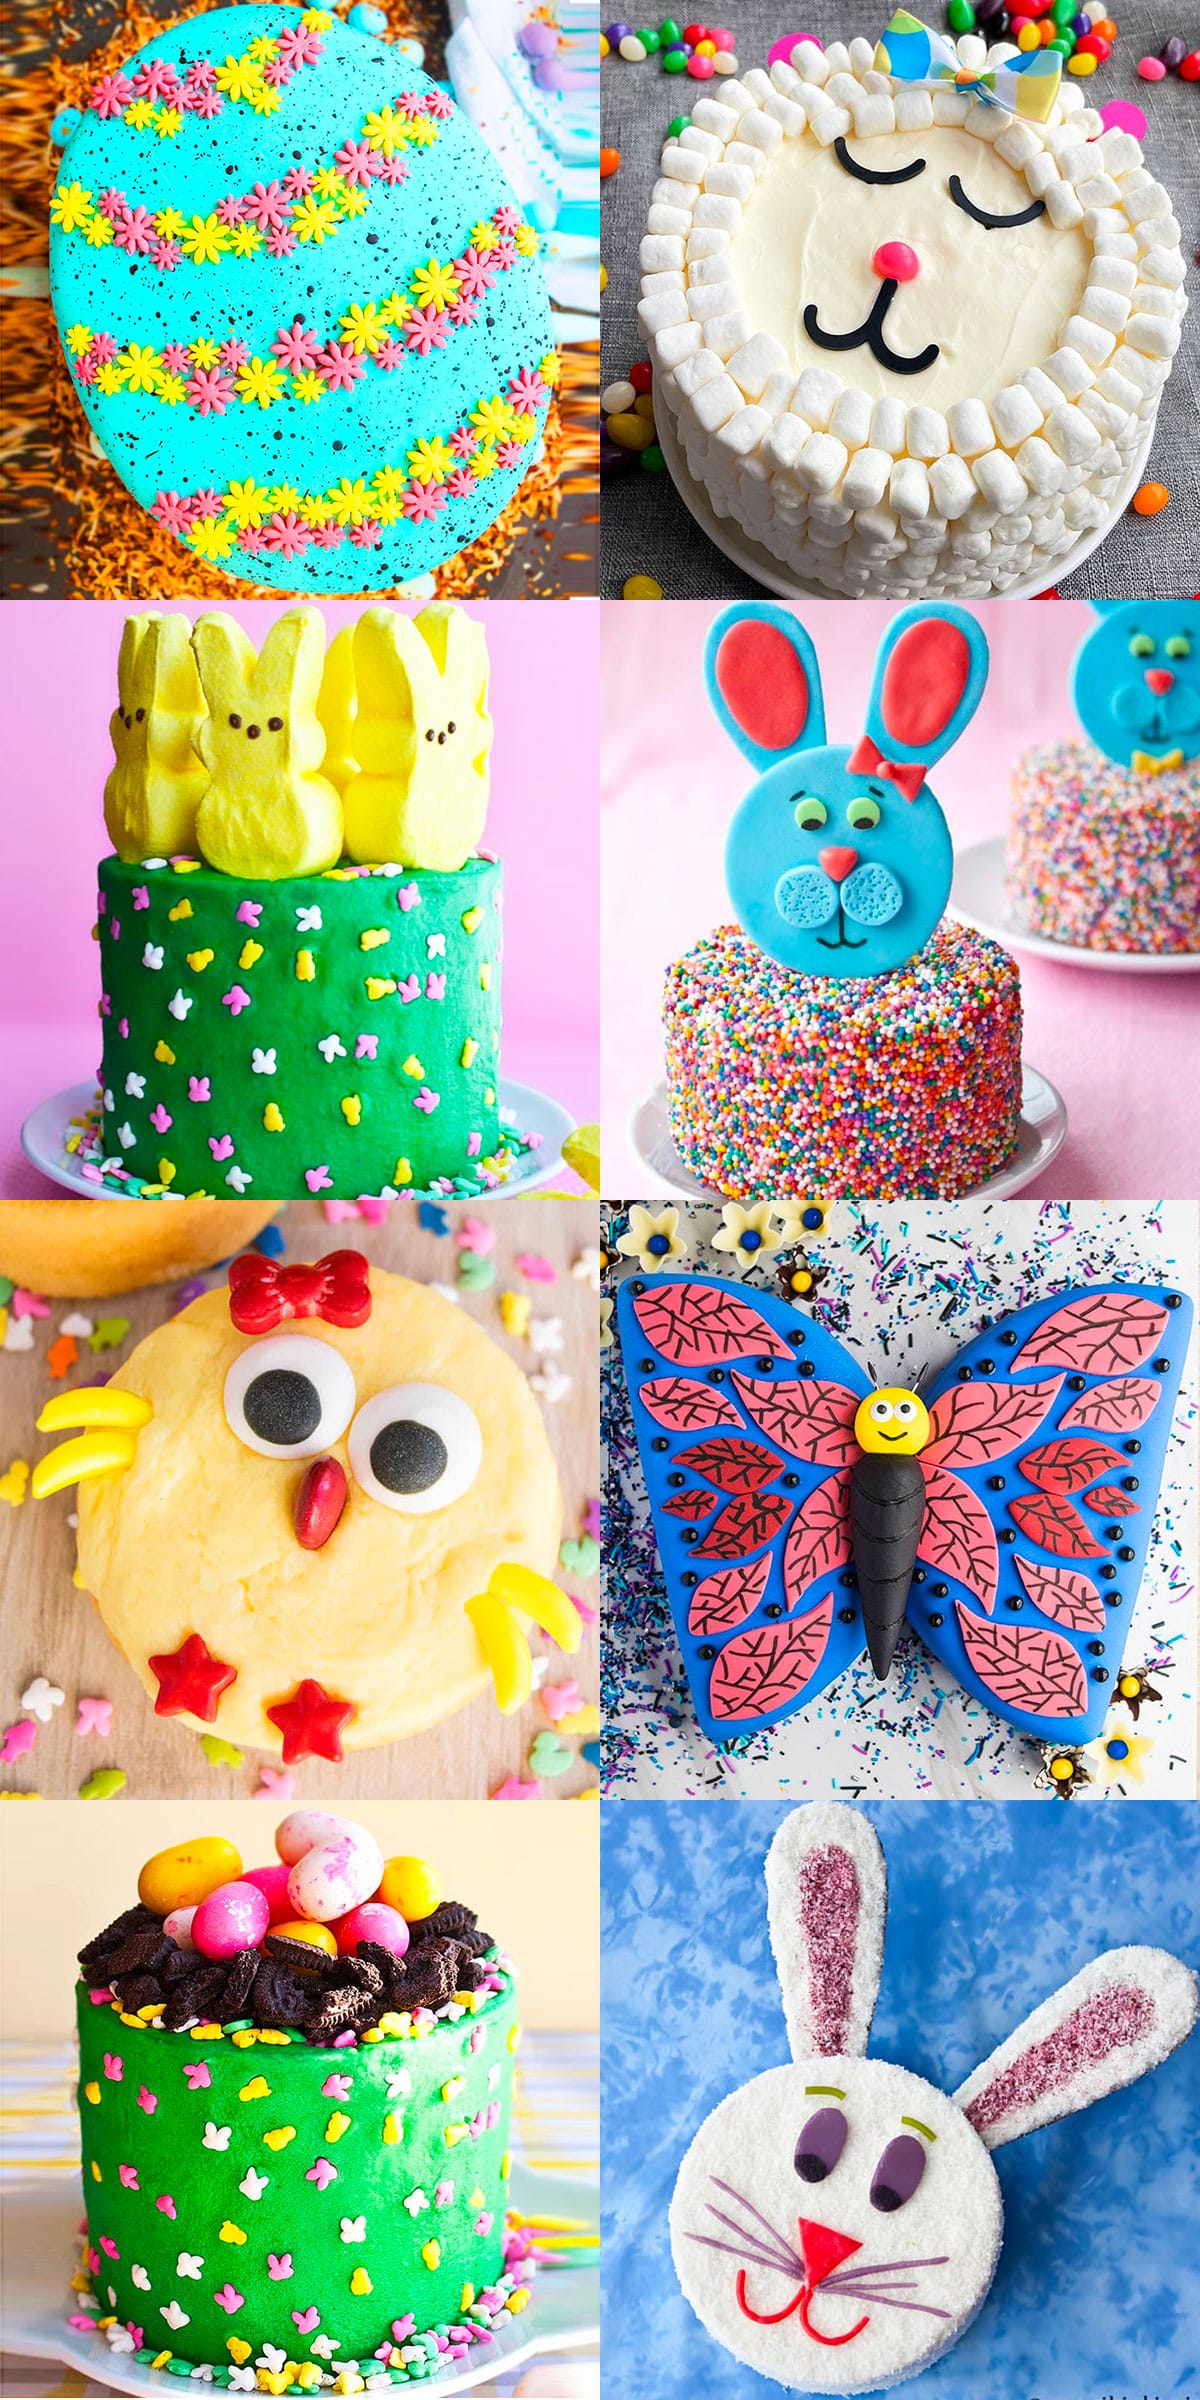 Collage Image With Easter Cake Ideas. 